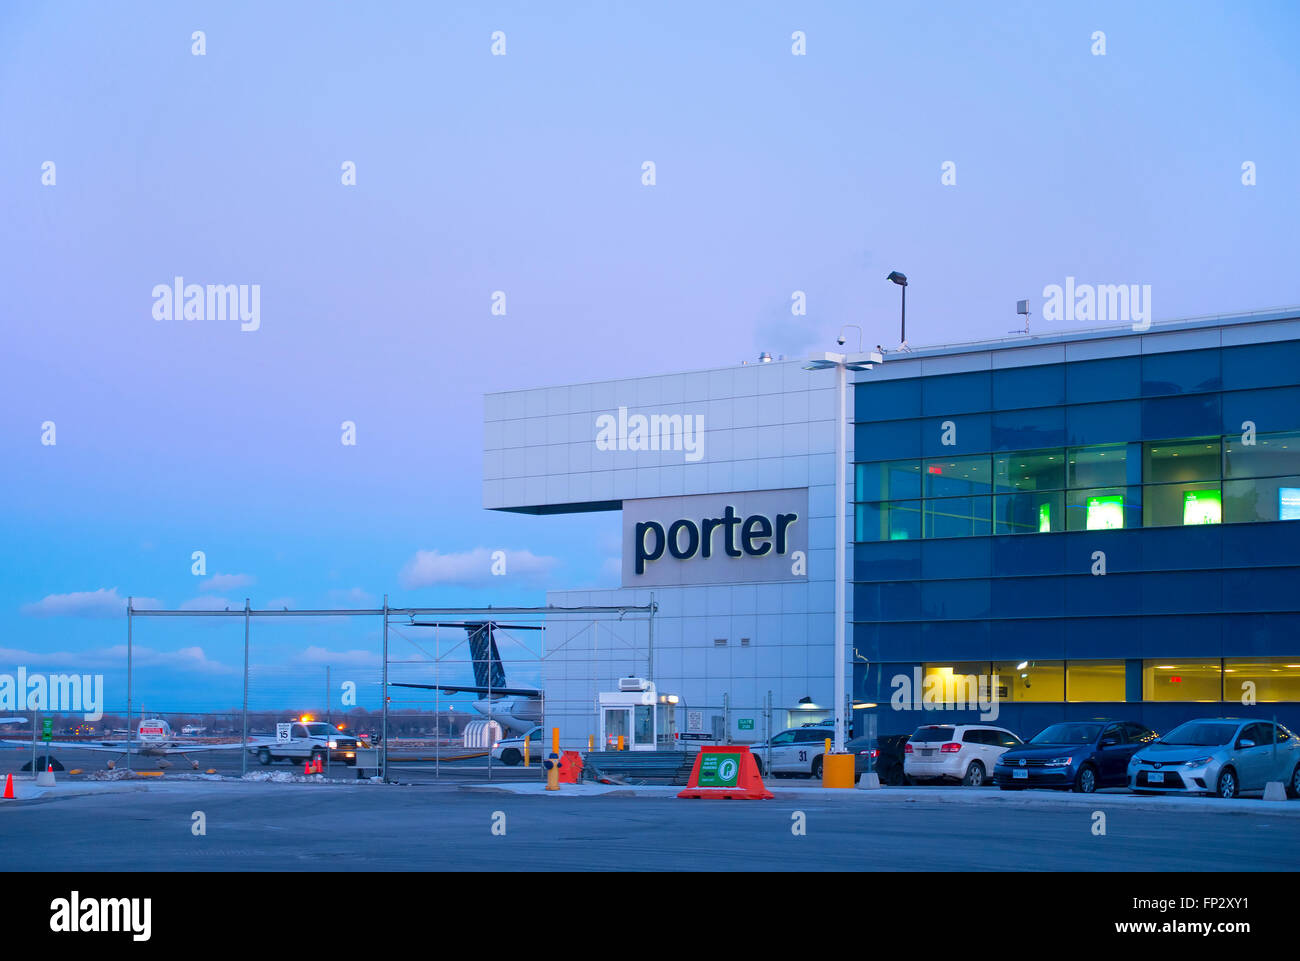 The Porter Airlines logo and terminal building. Billy Bishop Toronto City Airport. Toronto, Ontario, Canada. Stock Photo